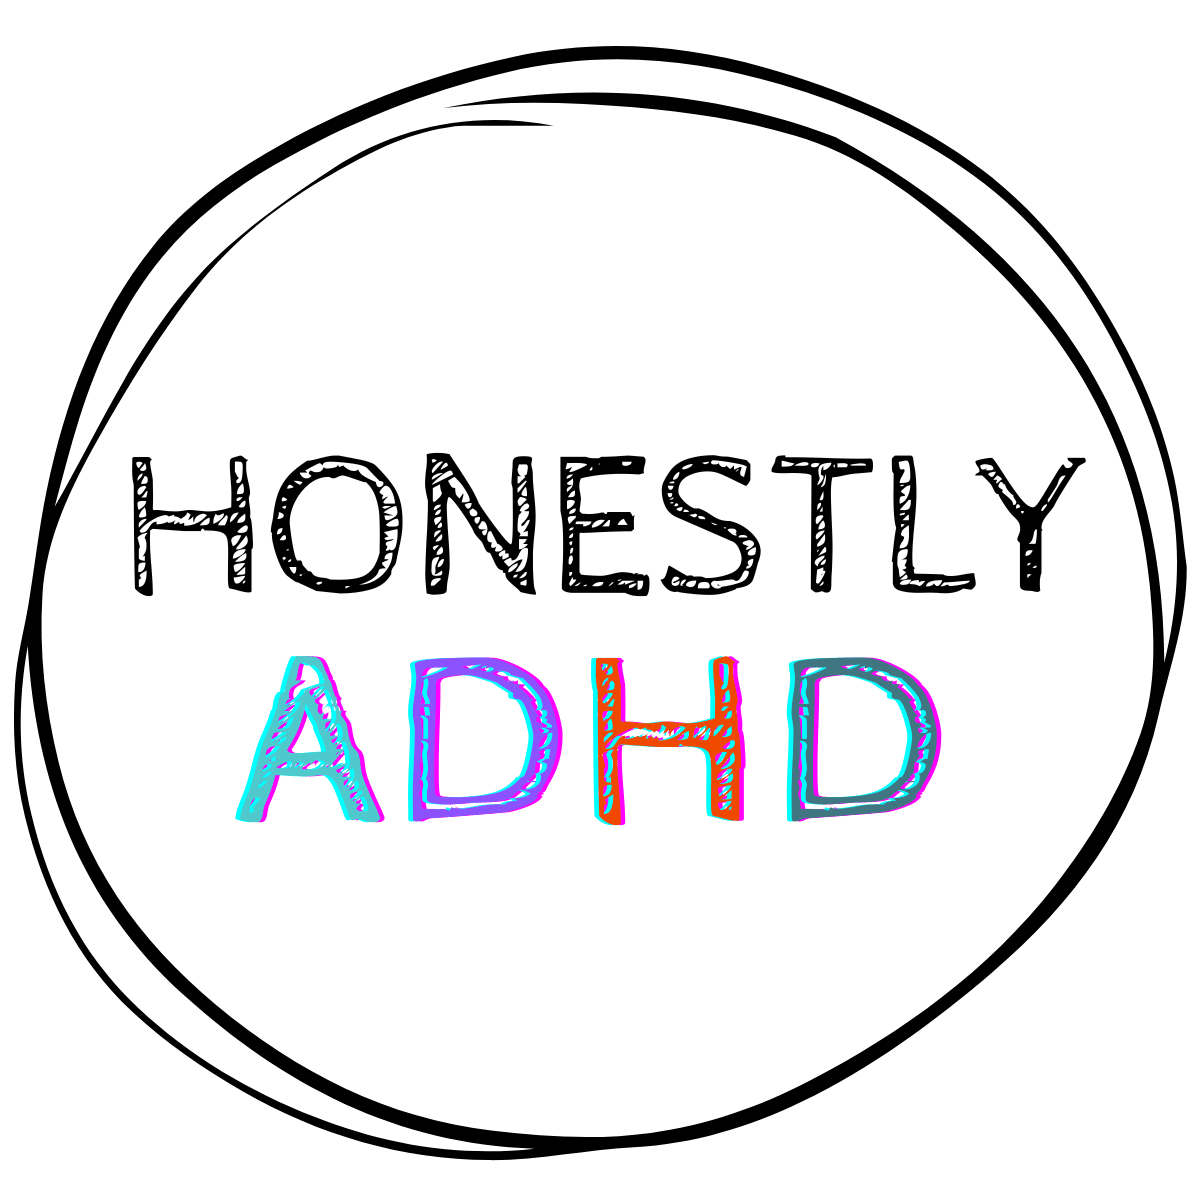 The honestly ADHD square logo with the text "honestly adhd" in a circle.